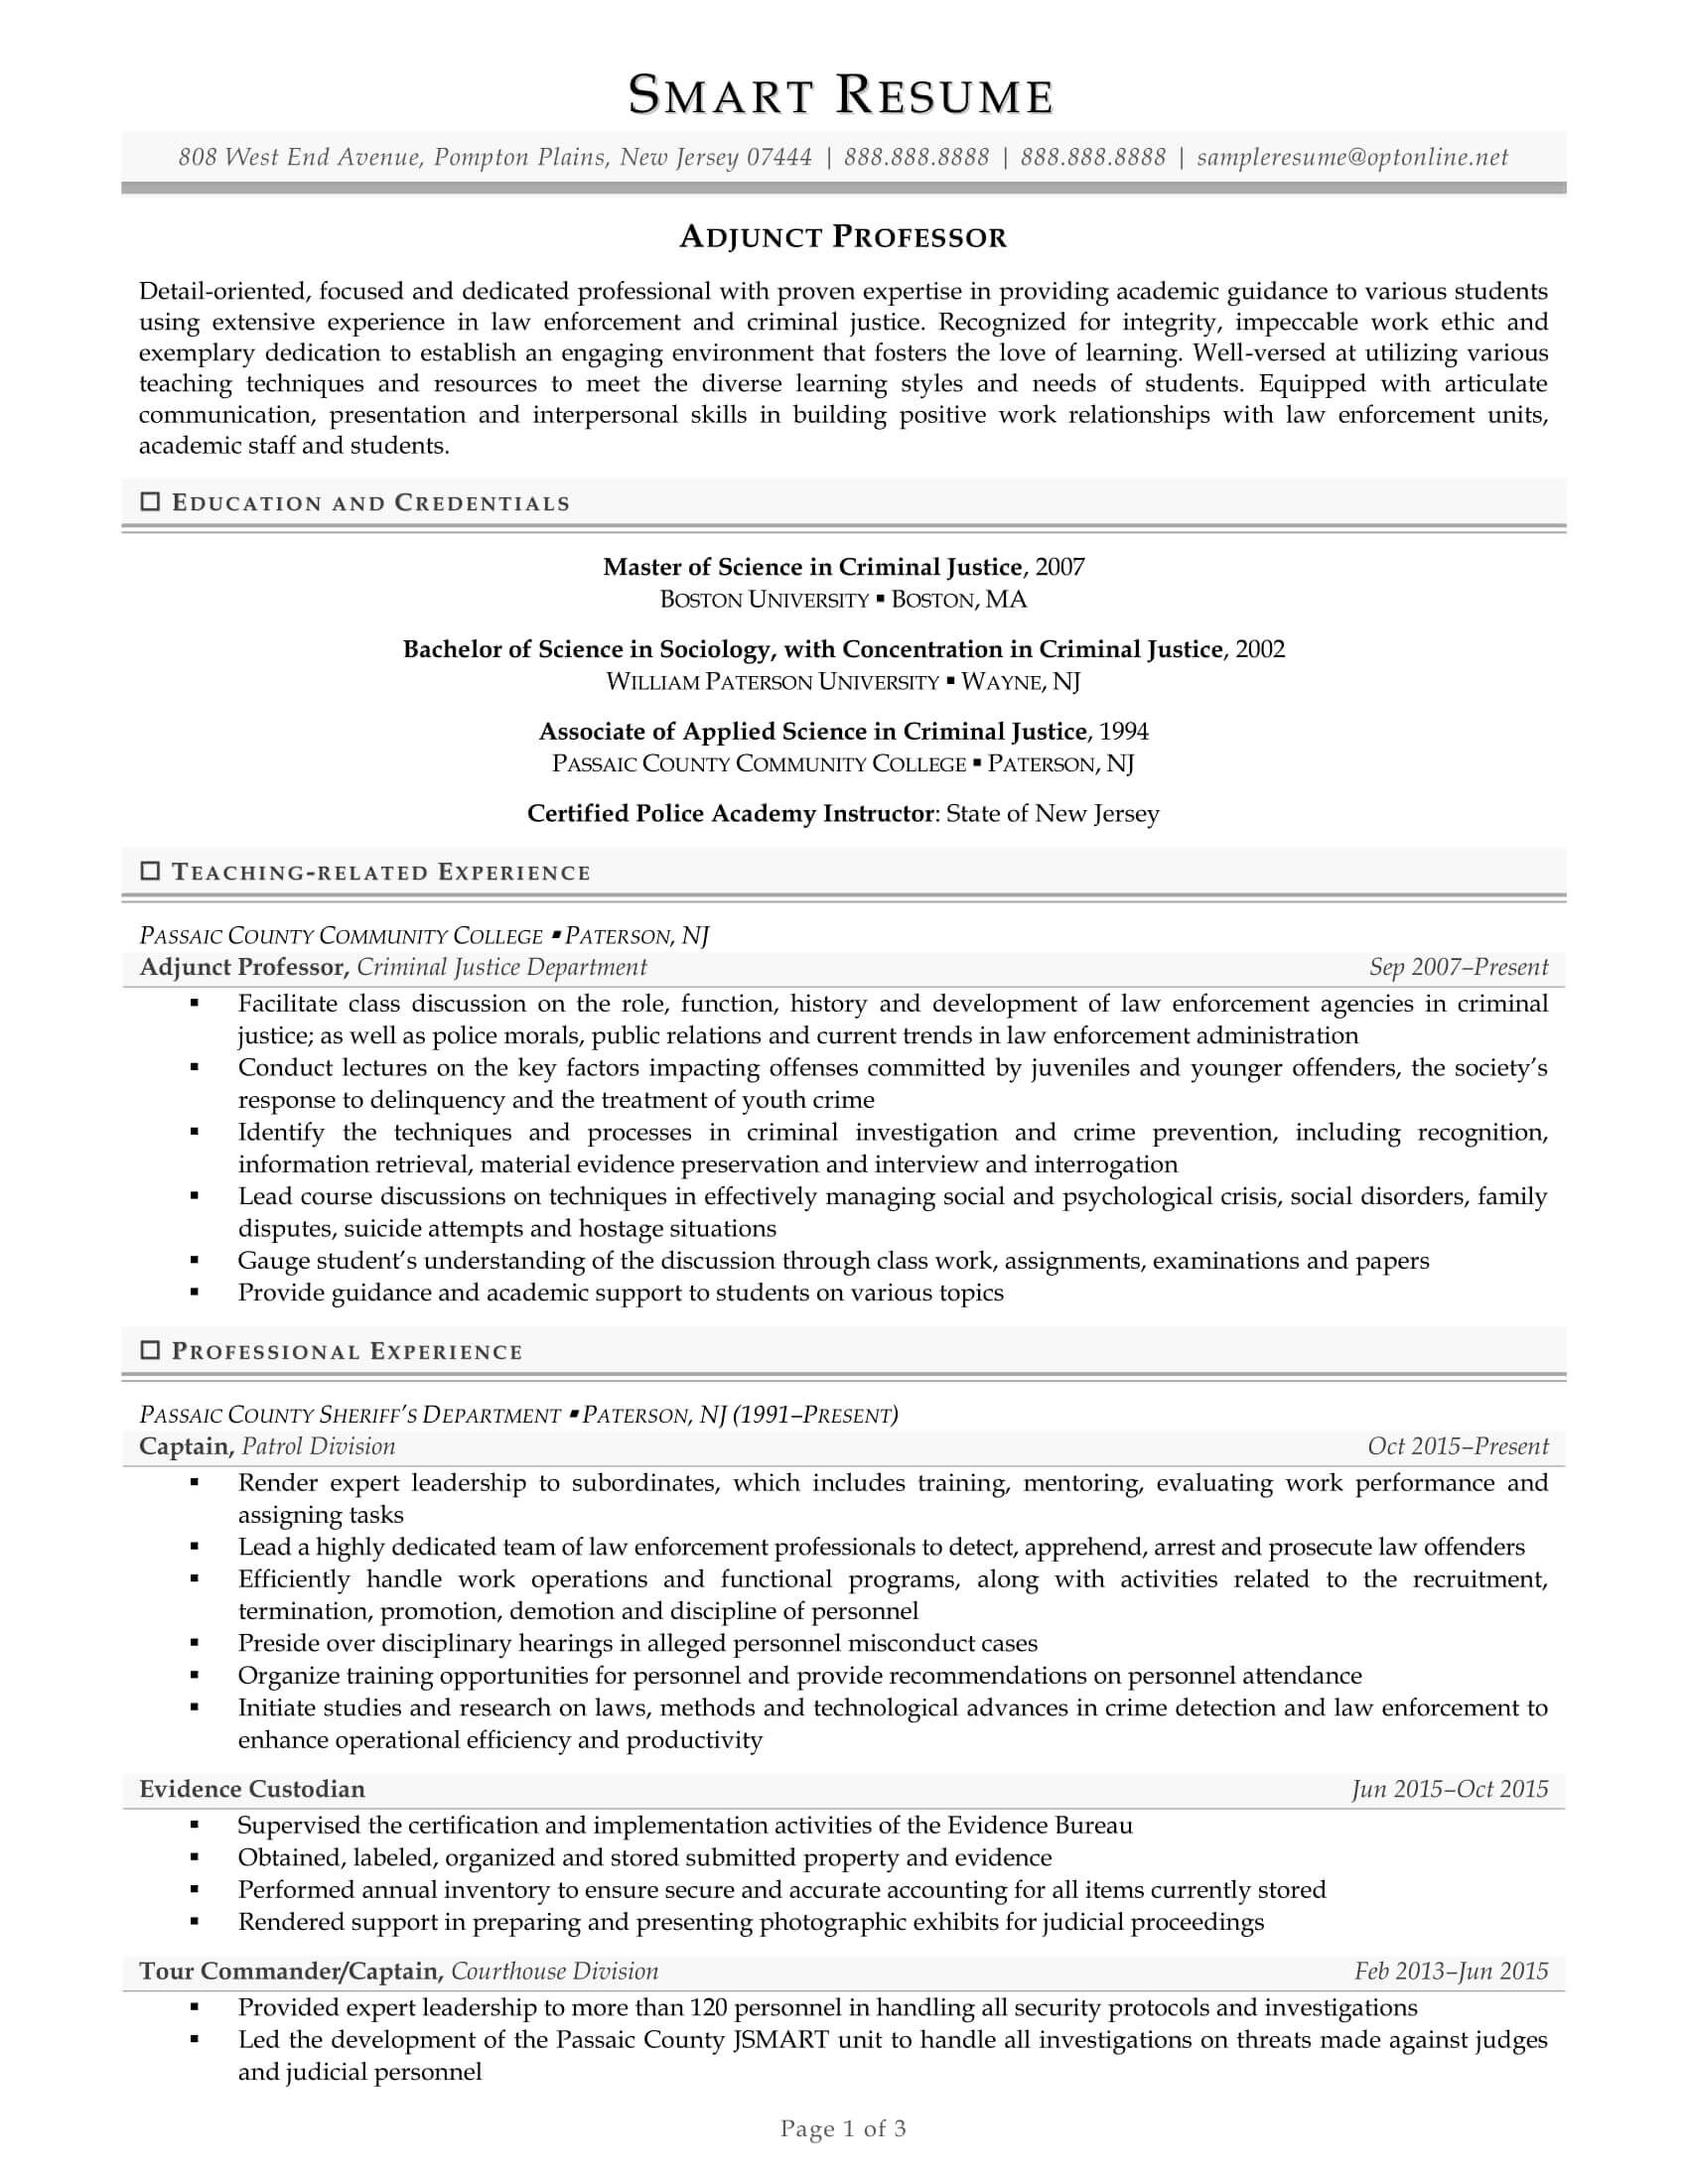 Entry Level Sports Management Resume Sample Resume Examples Smart Resume Services